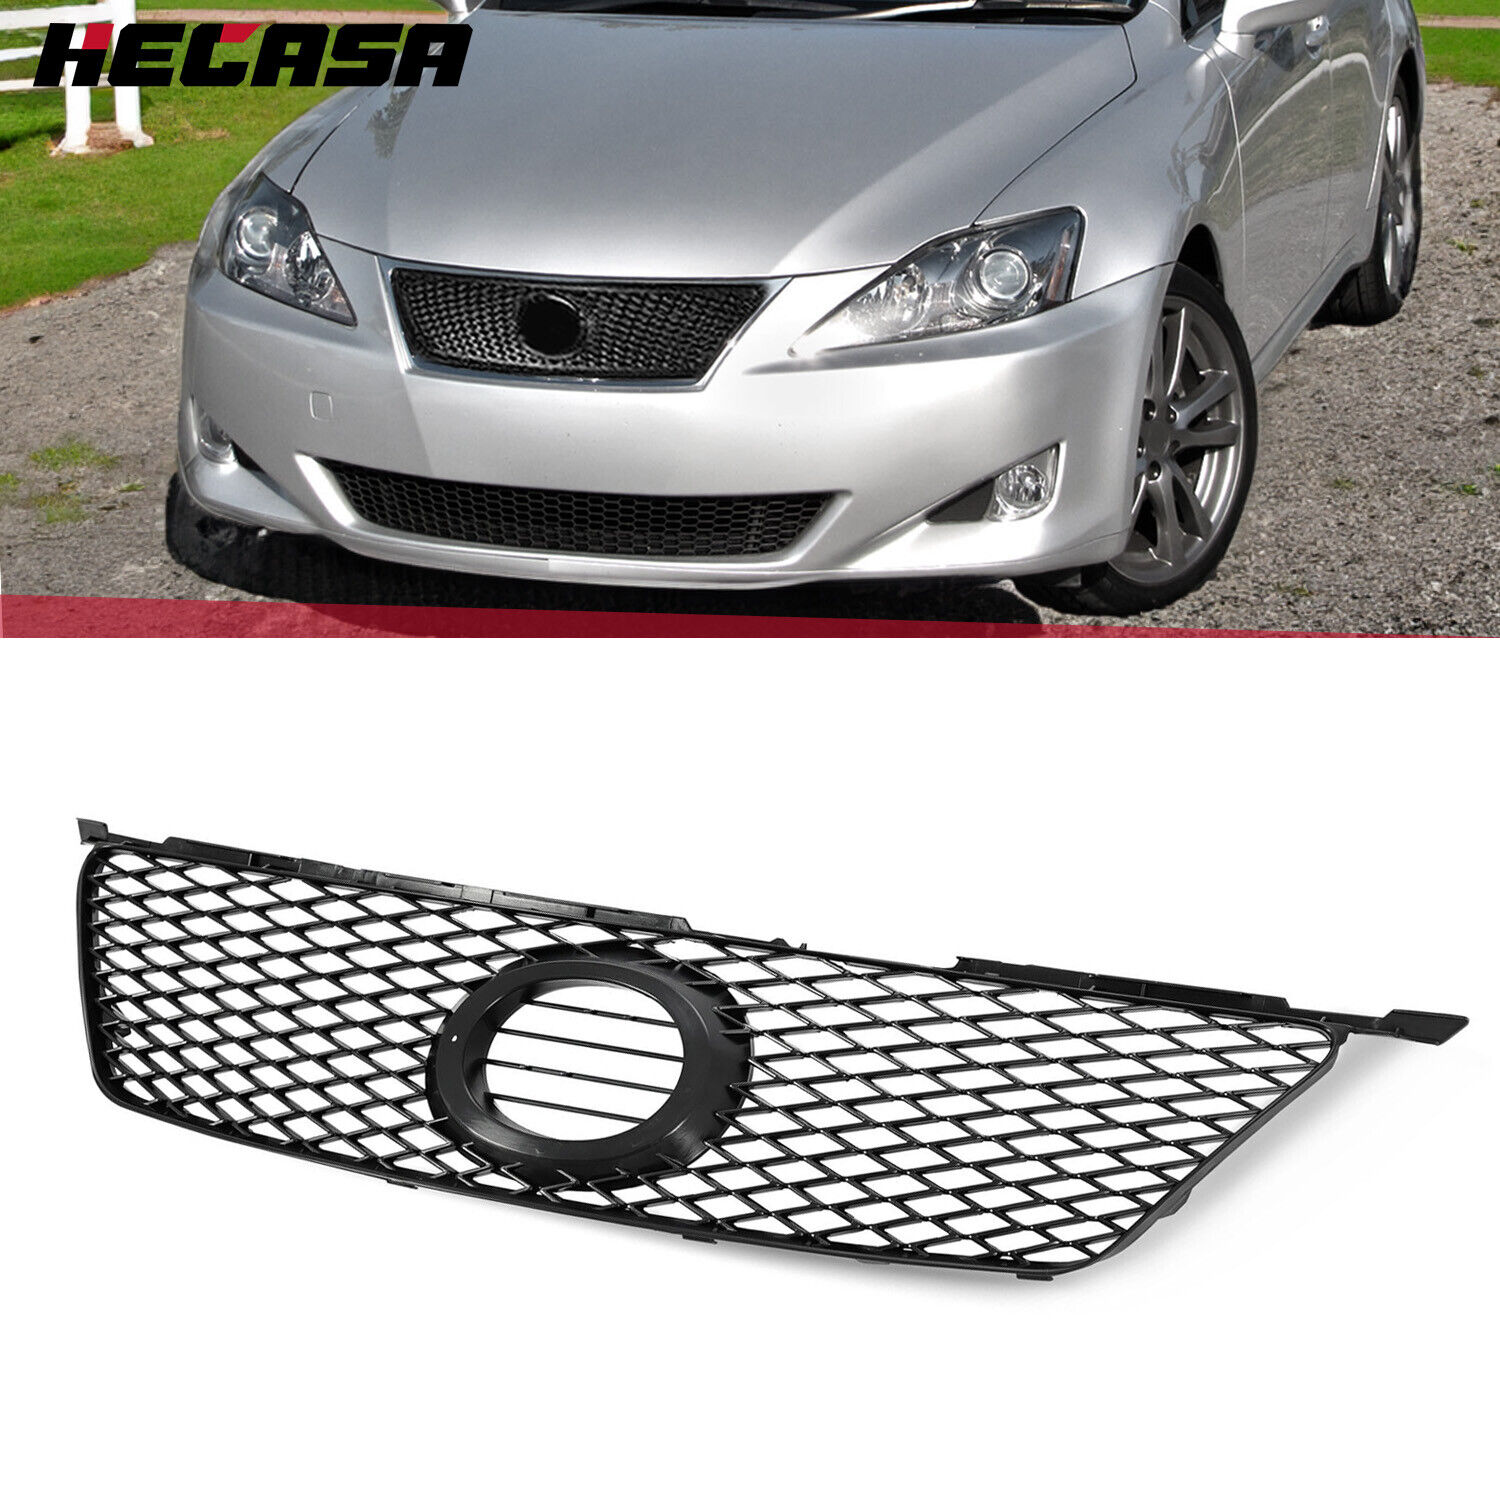 For Lexus IS250 IS350 2006-2008 Black Sport Mesh Grille Front Hood Bumper Grill